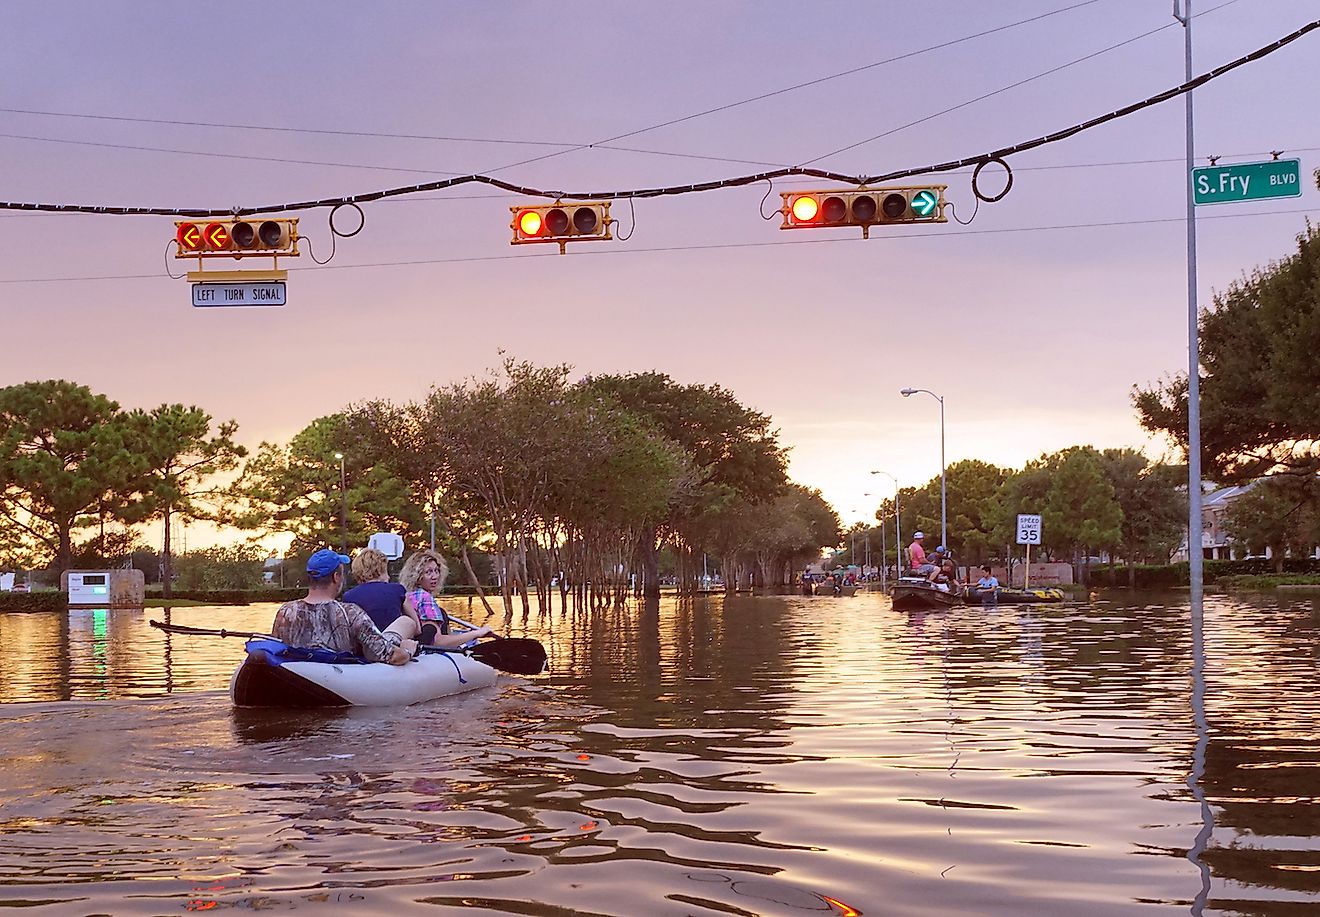 Flooded Houston streets and boats with people at sunset, Texas, USA. Image credit: IrinaK/Shutterstock.com